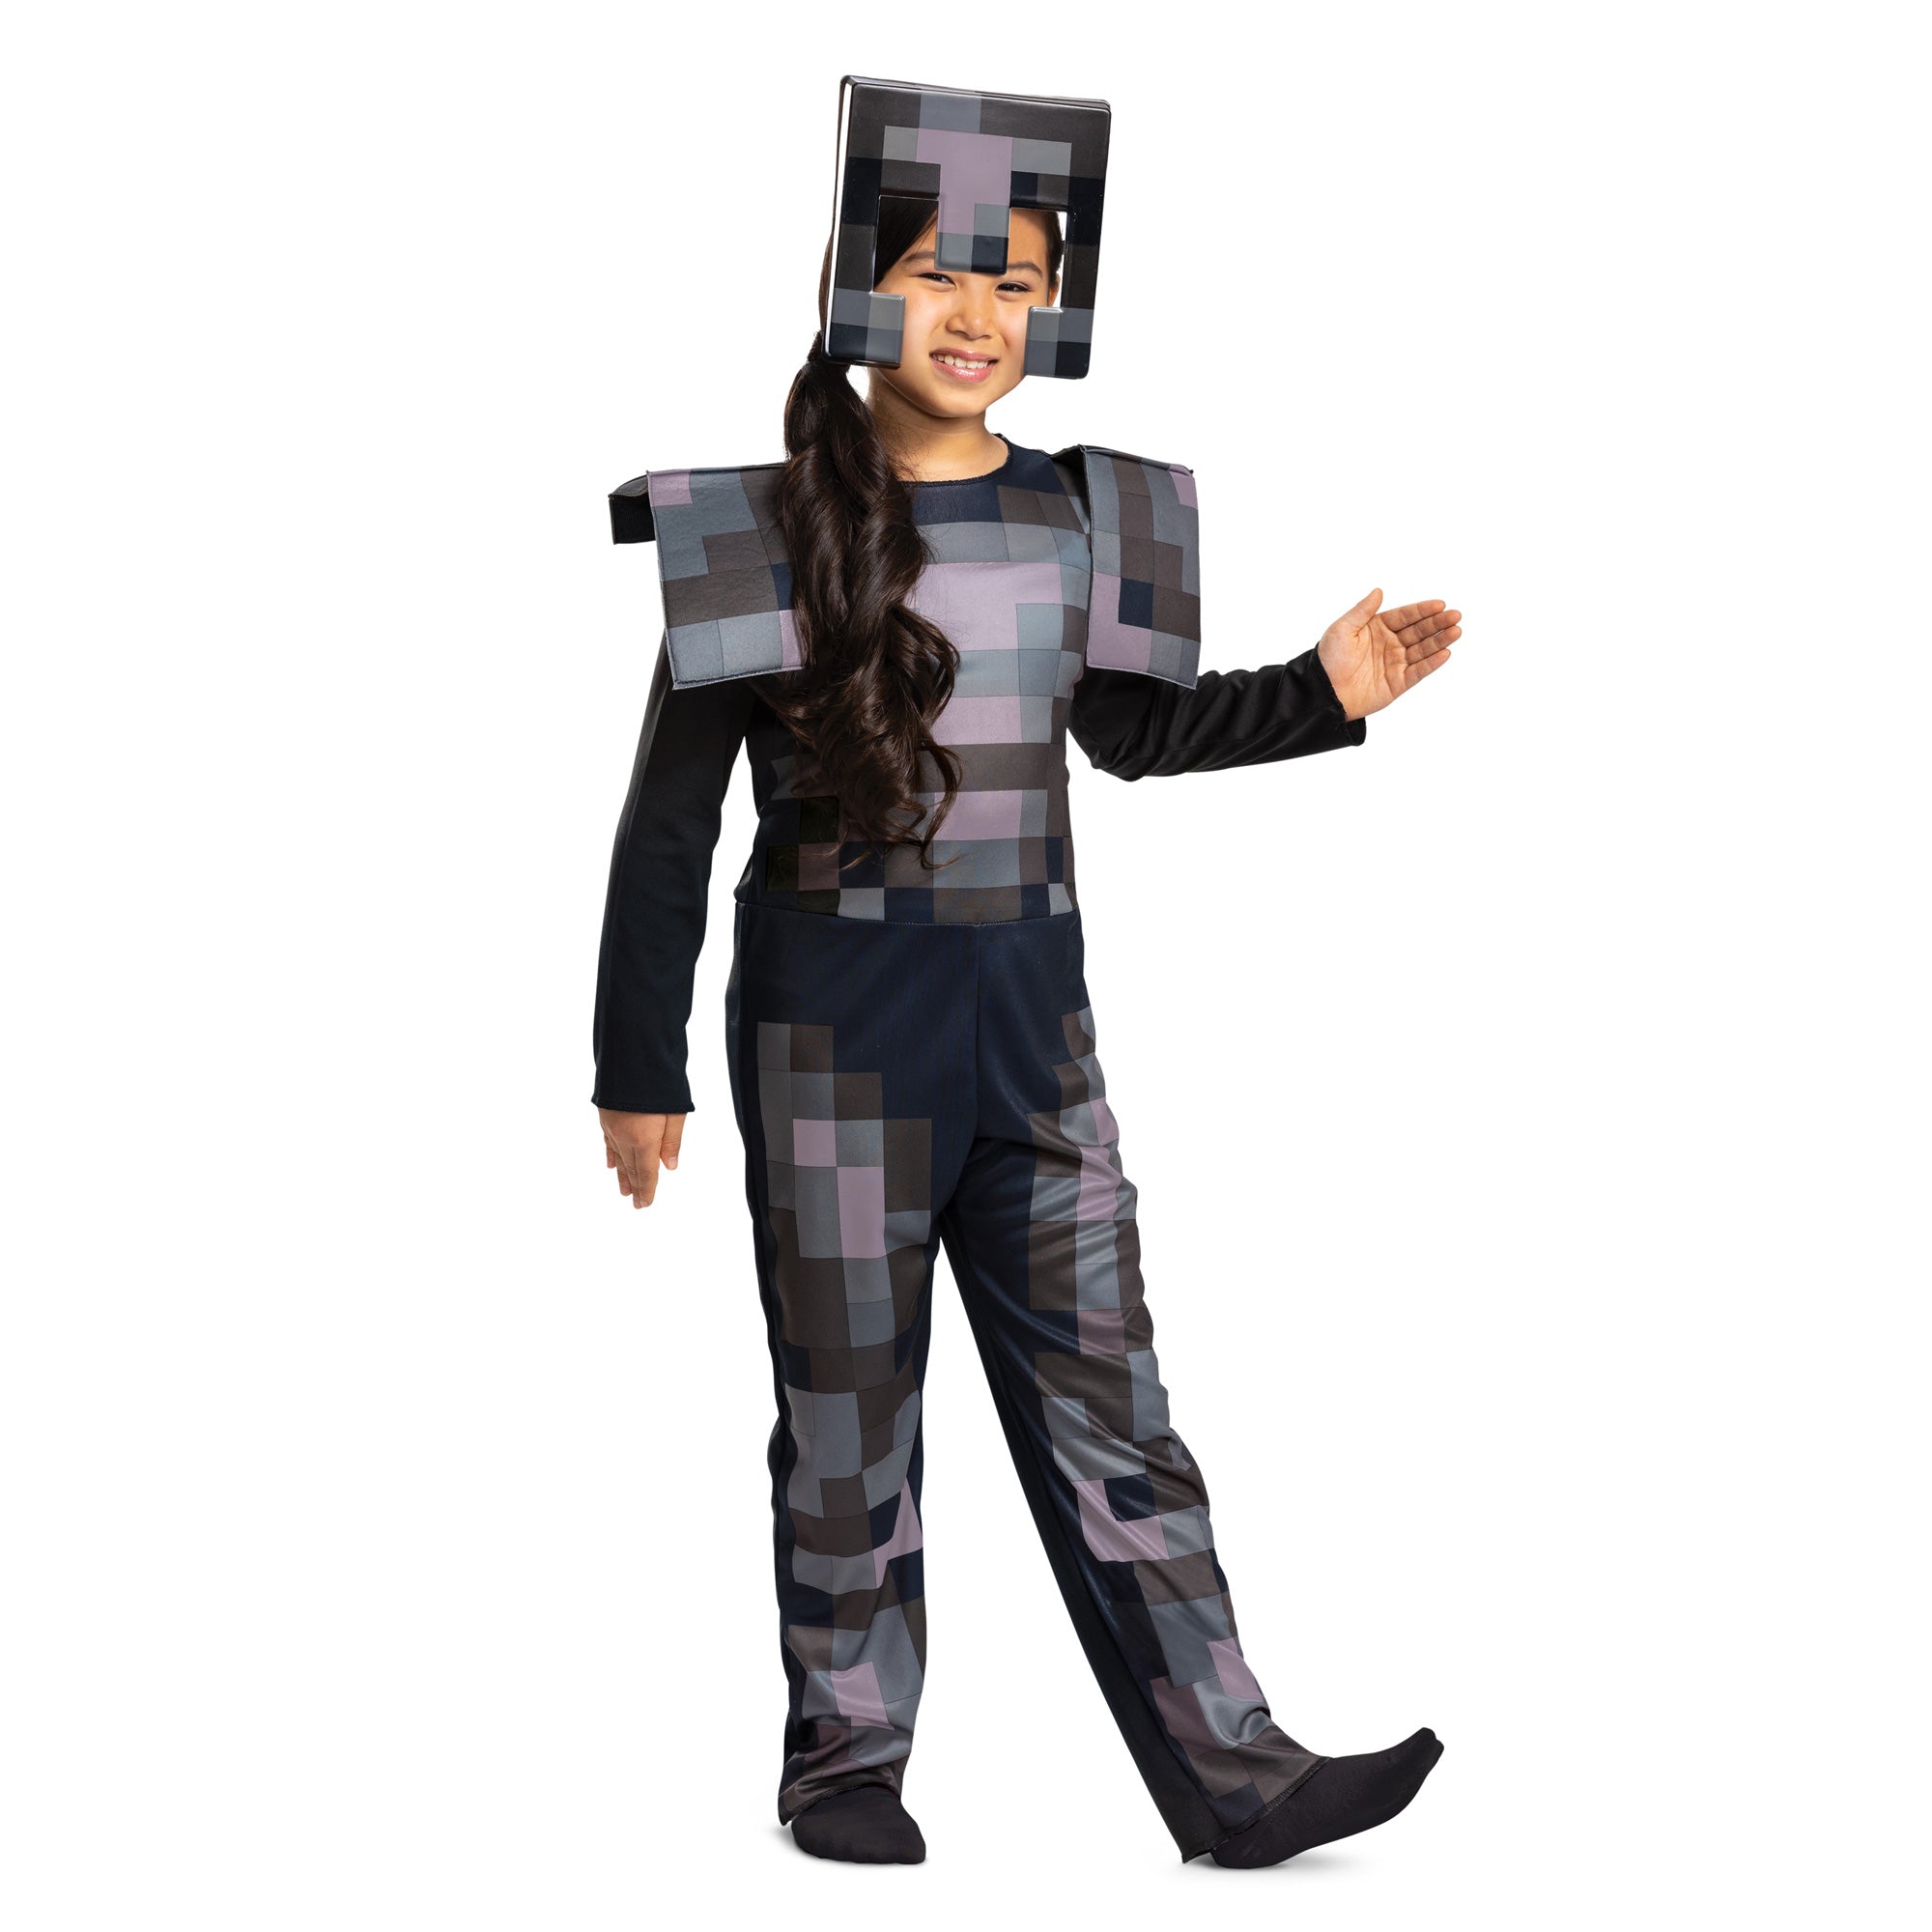 Minecraft Netherite Armor Classic Costume for Kids, Grey Jumpsuit